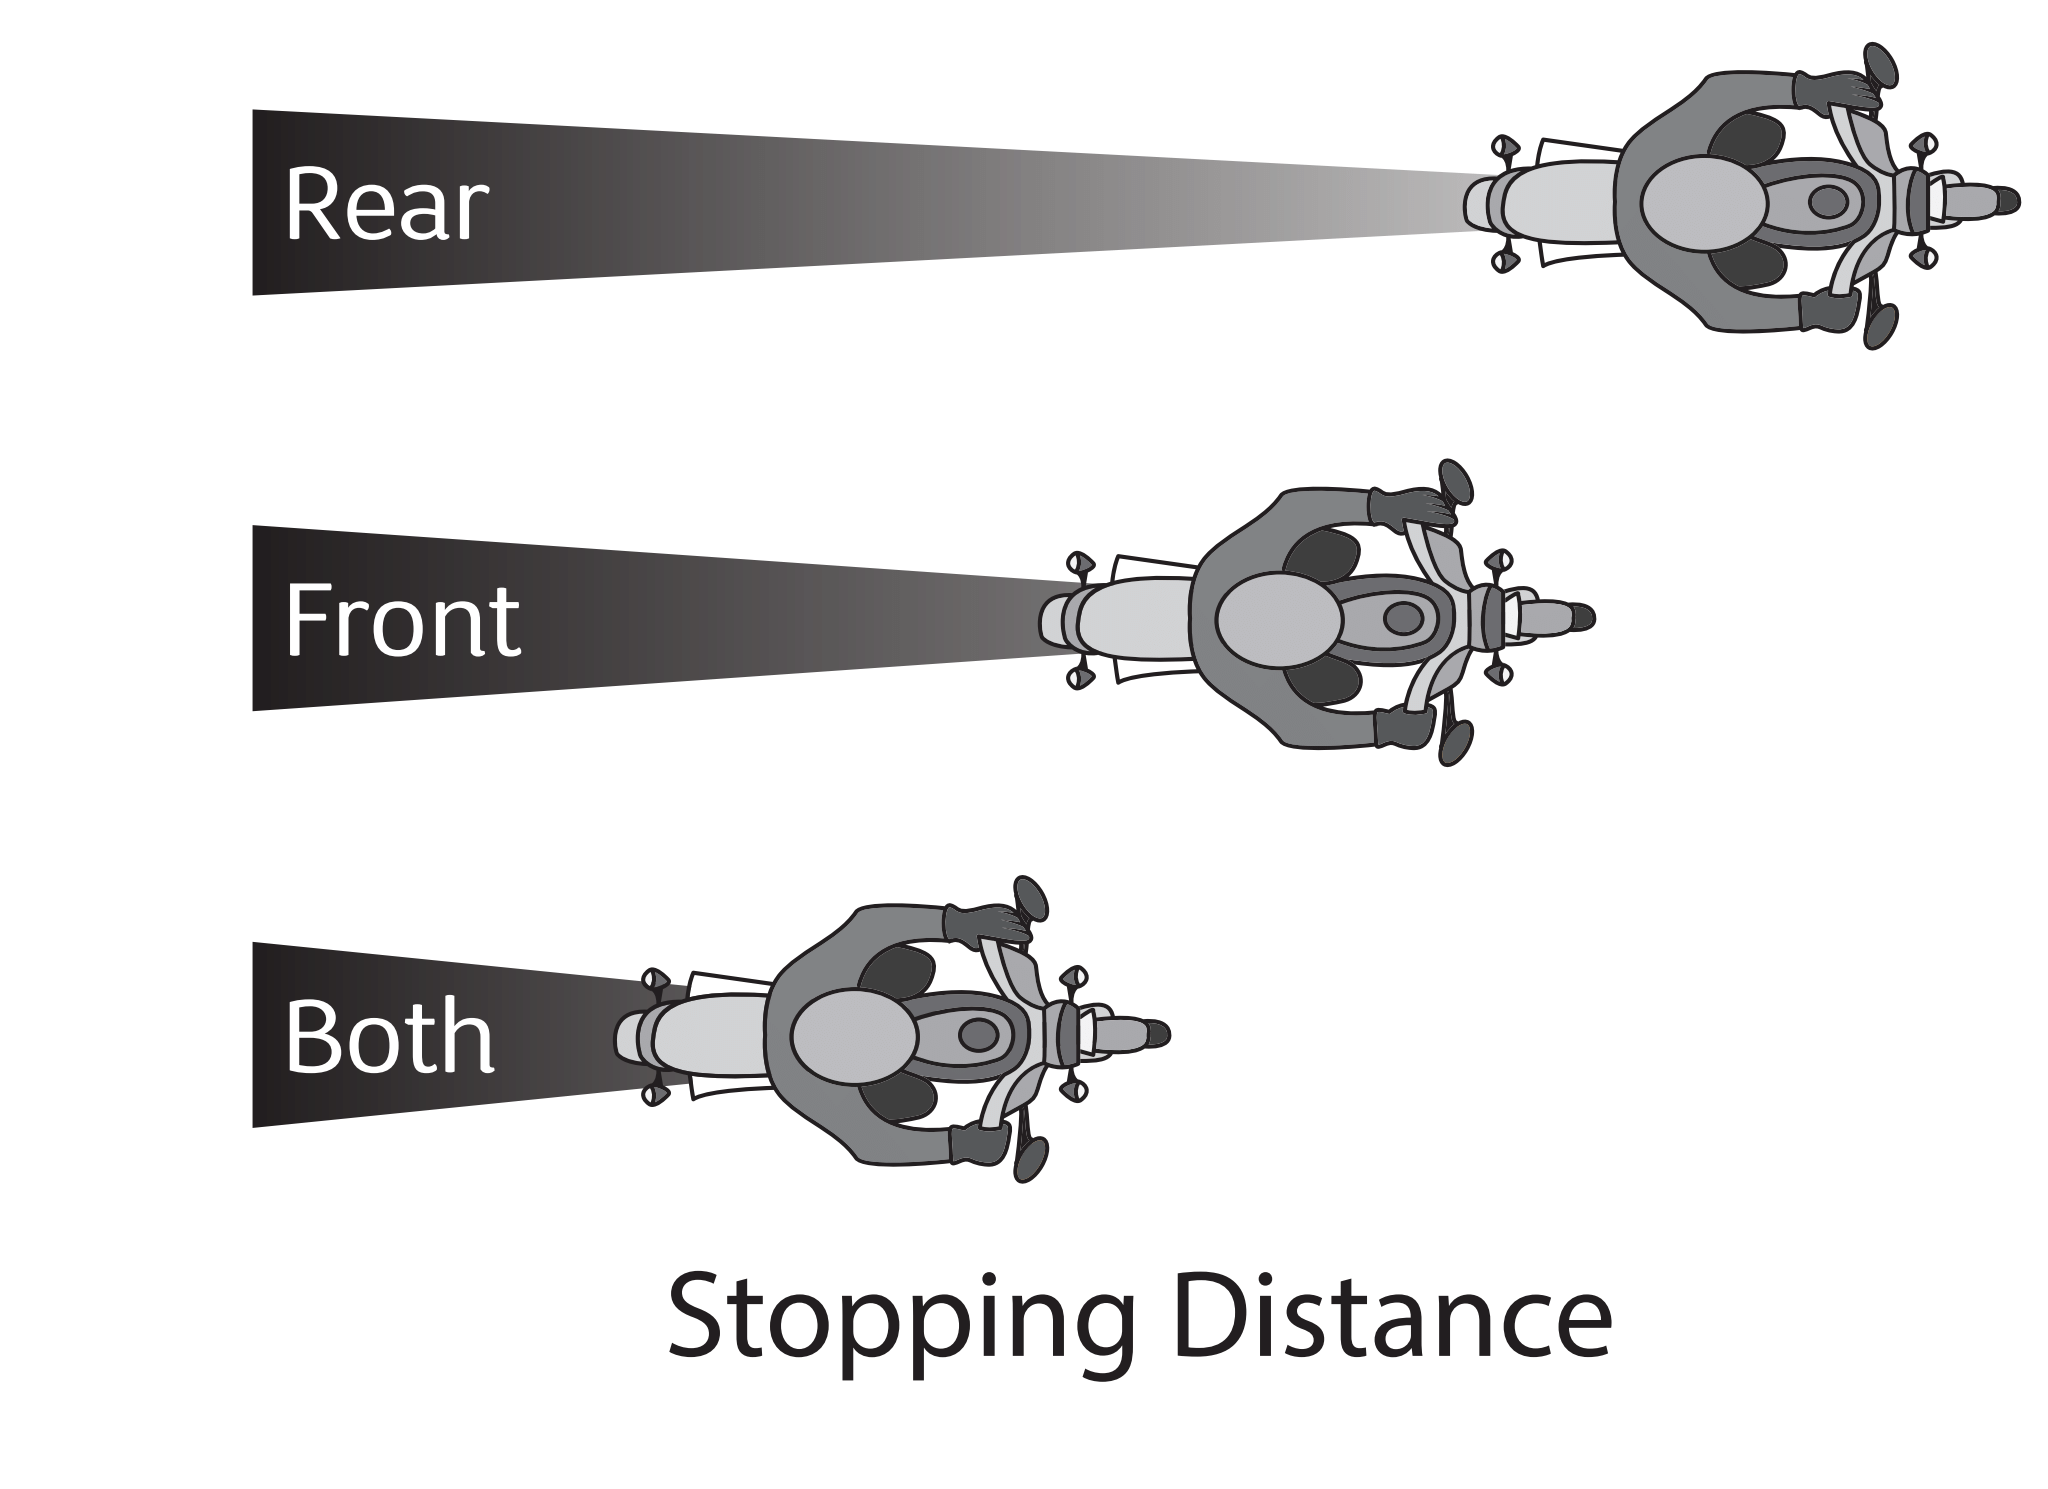 image of stopping distance using the three brake choices on a motorcycle